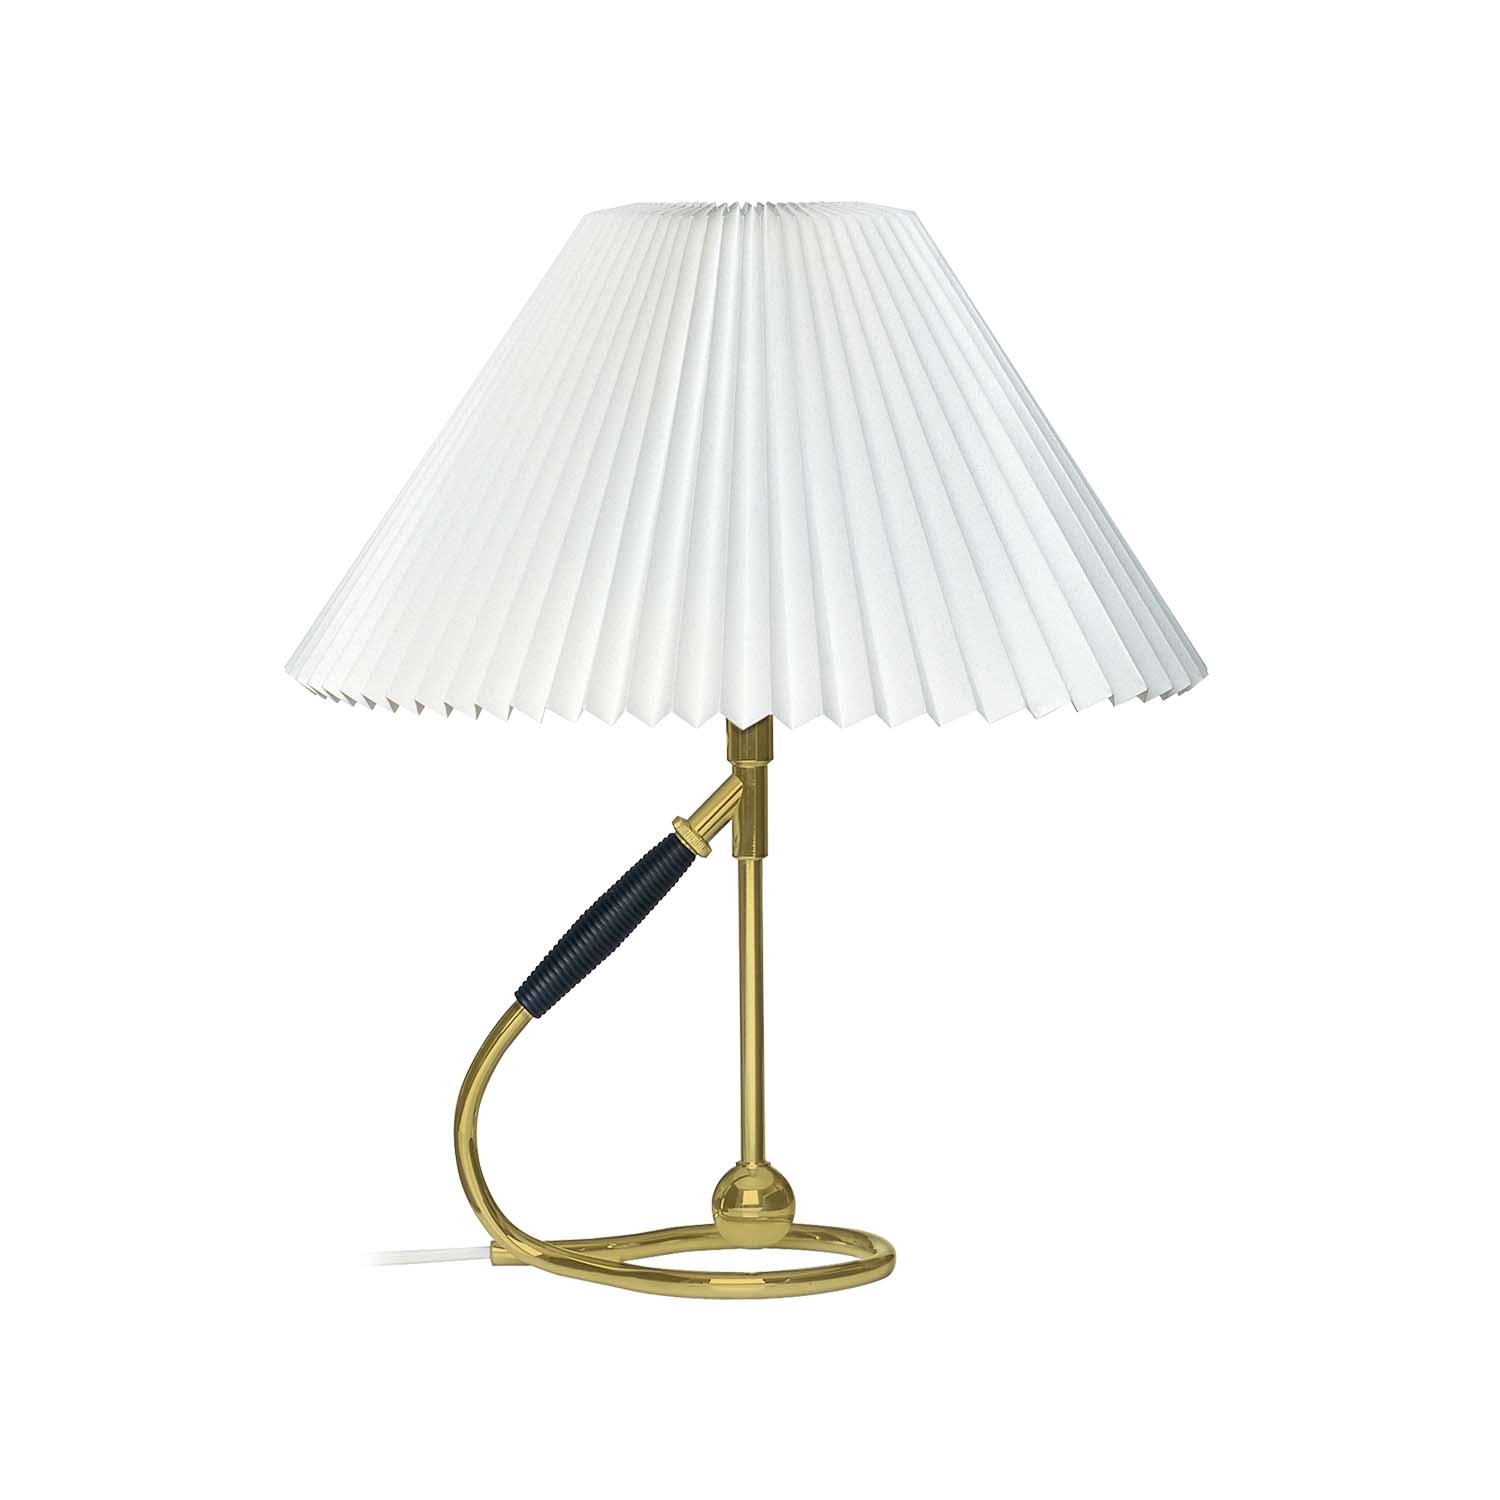 CLASSIC 306 - Handcrafted vintage bedside lamp